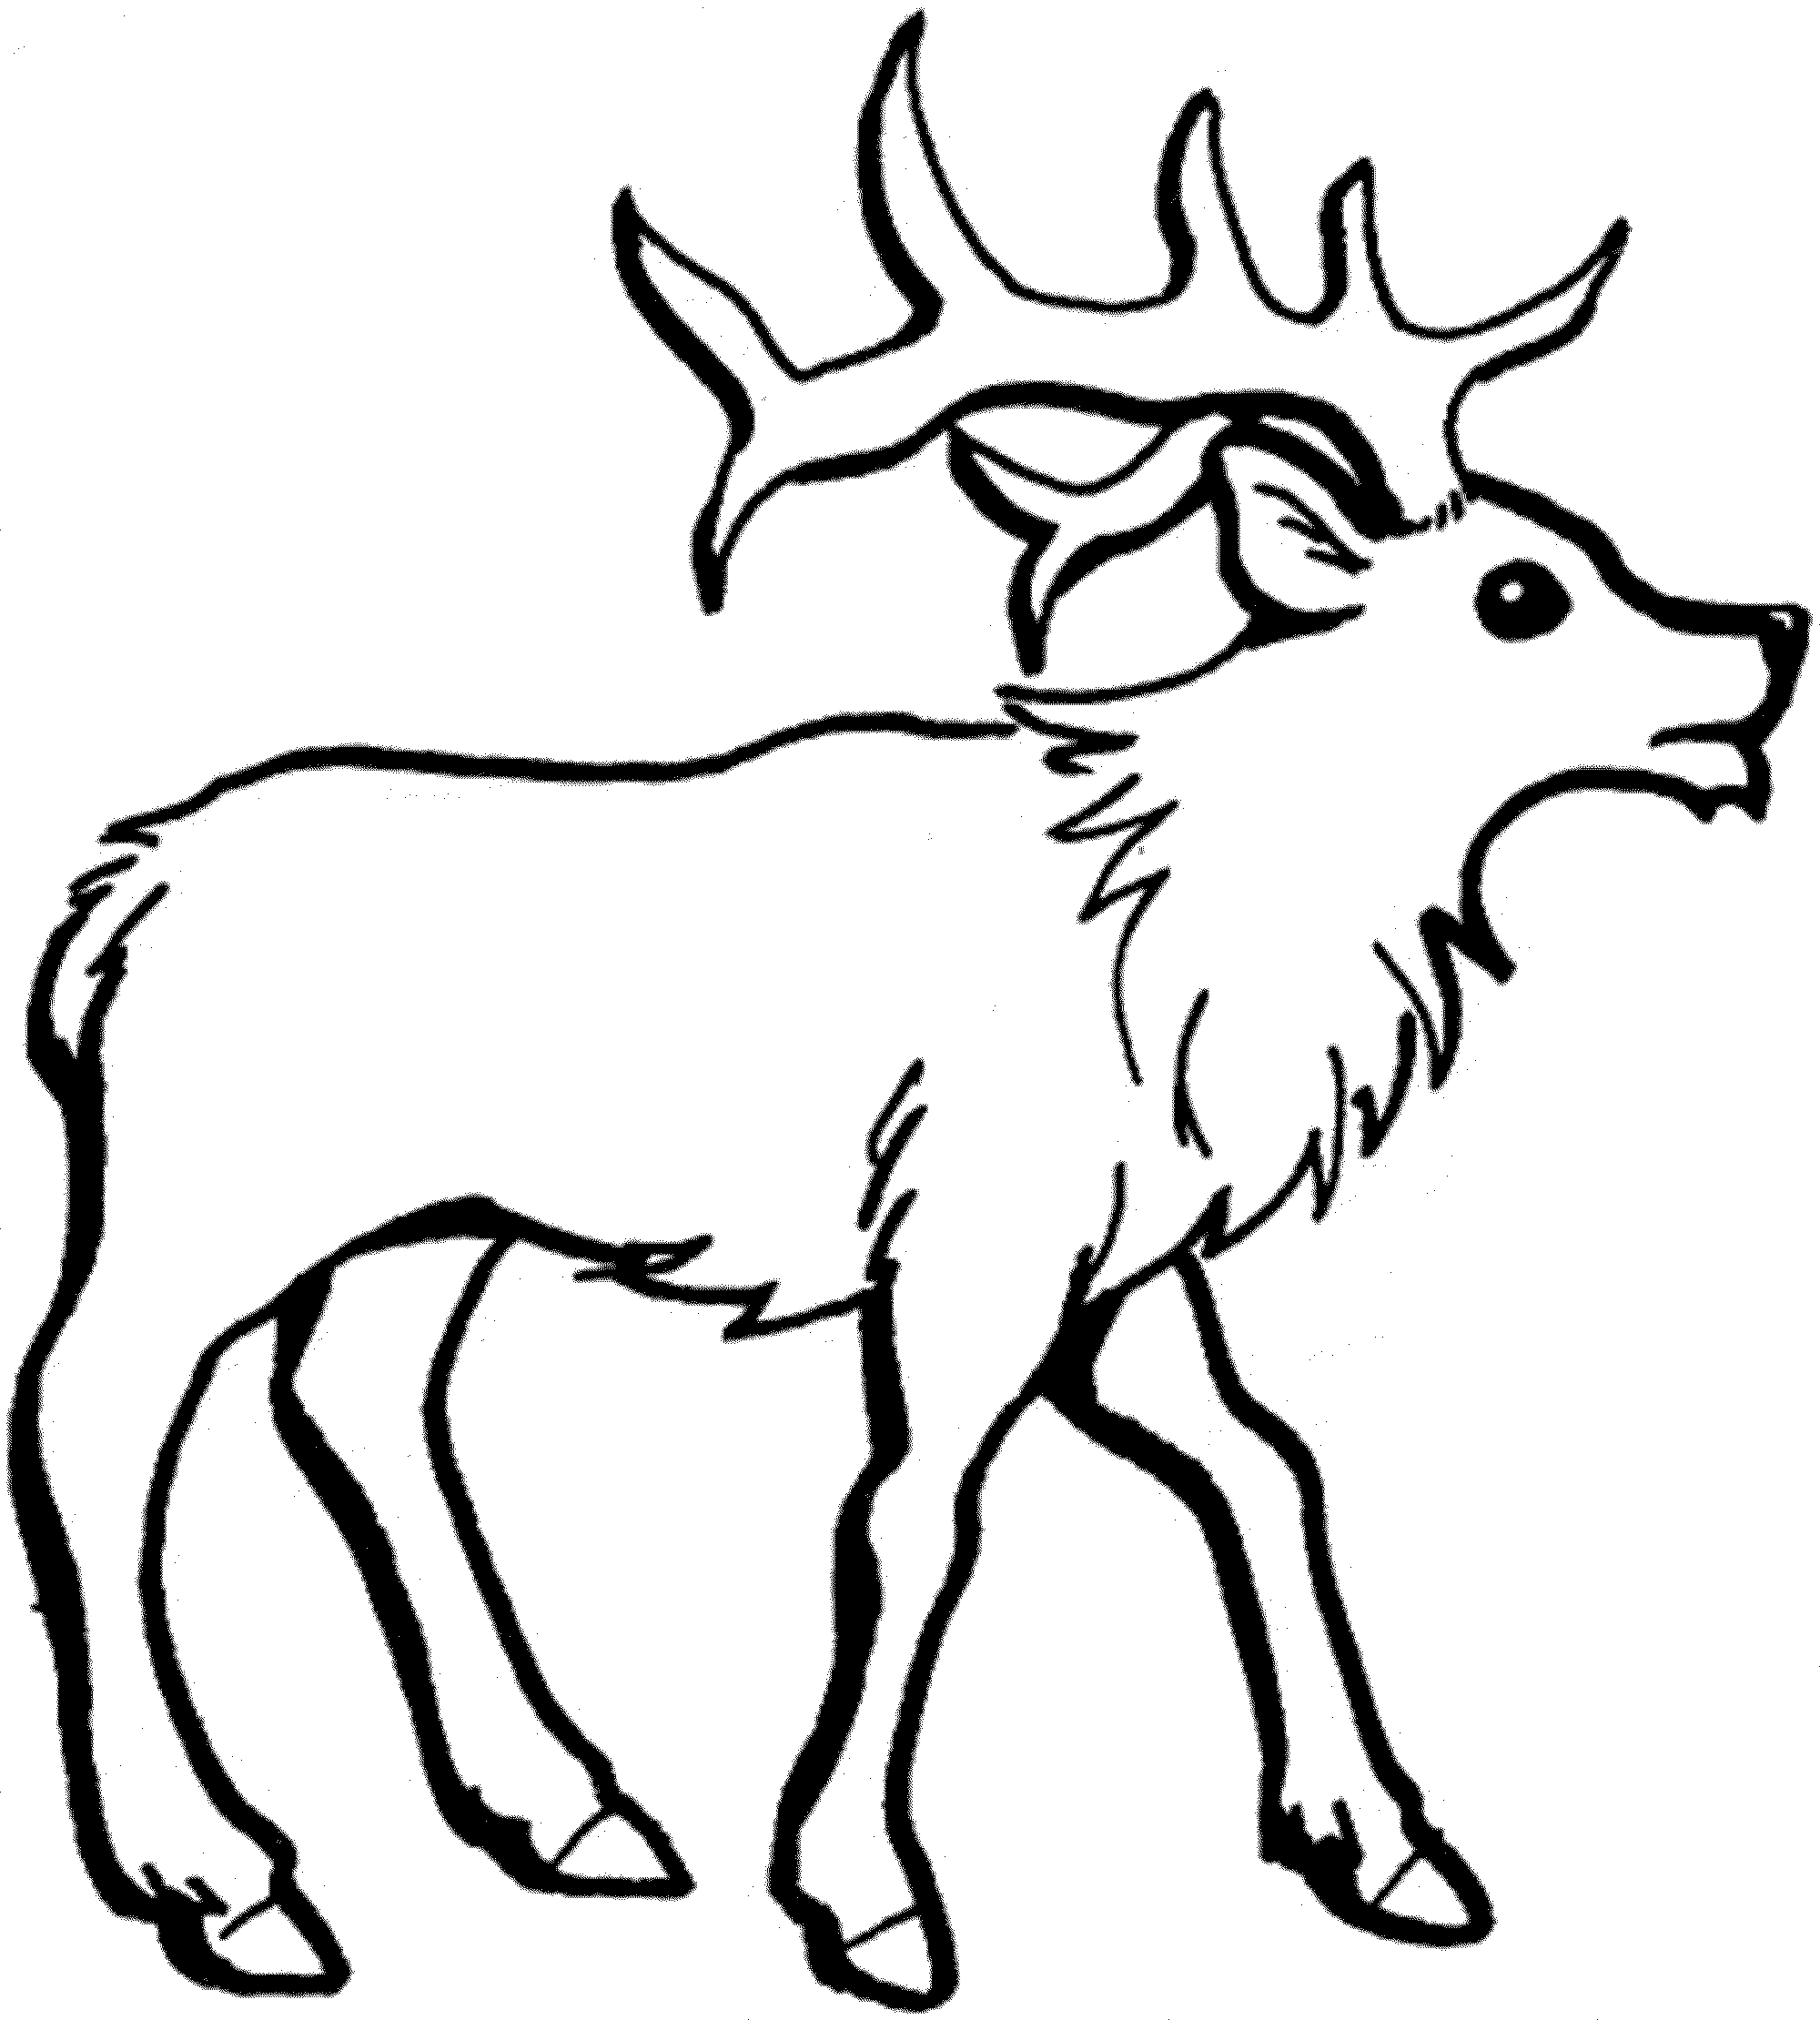 Deer Coloring Pages For Kids at GetColorings.com | Free printable